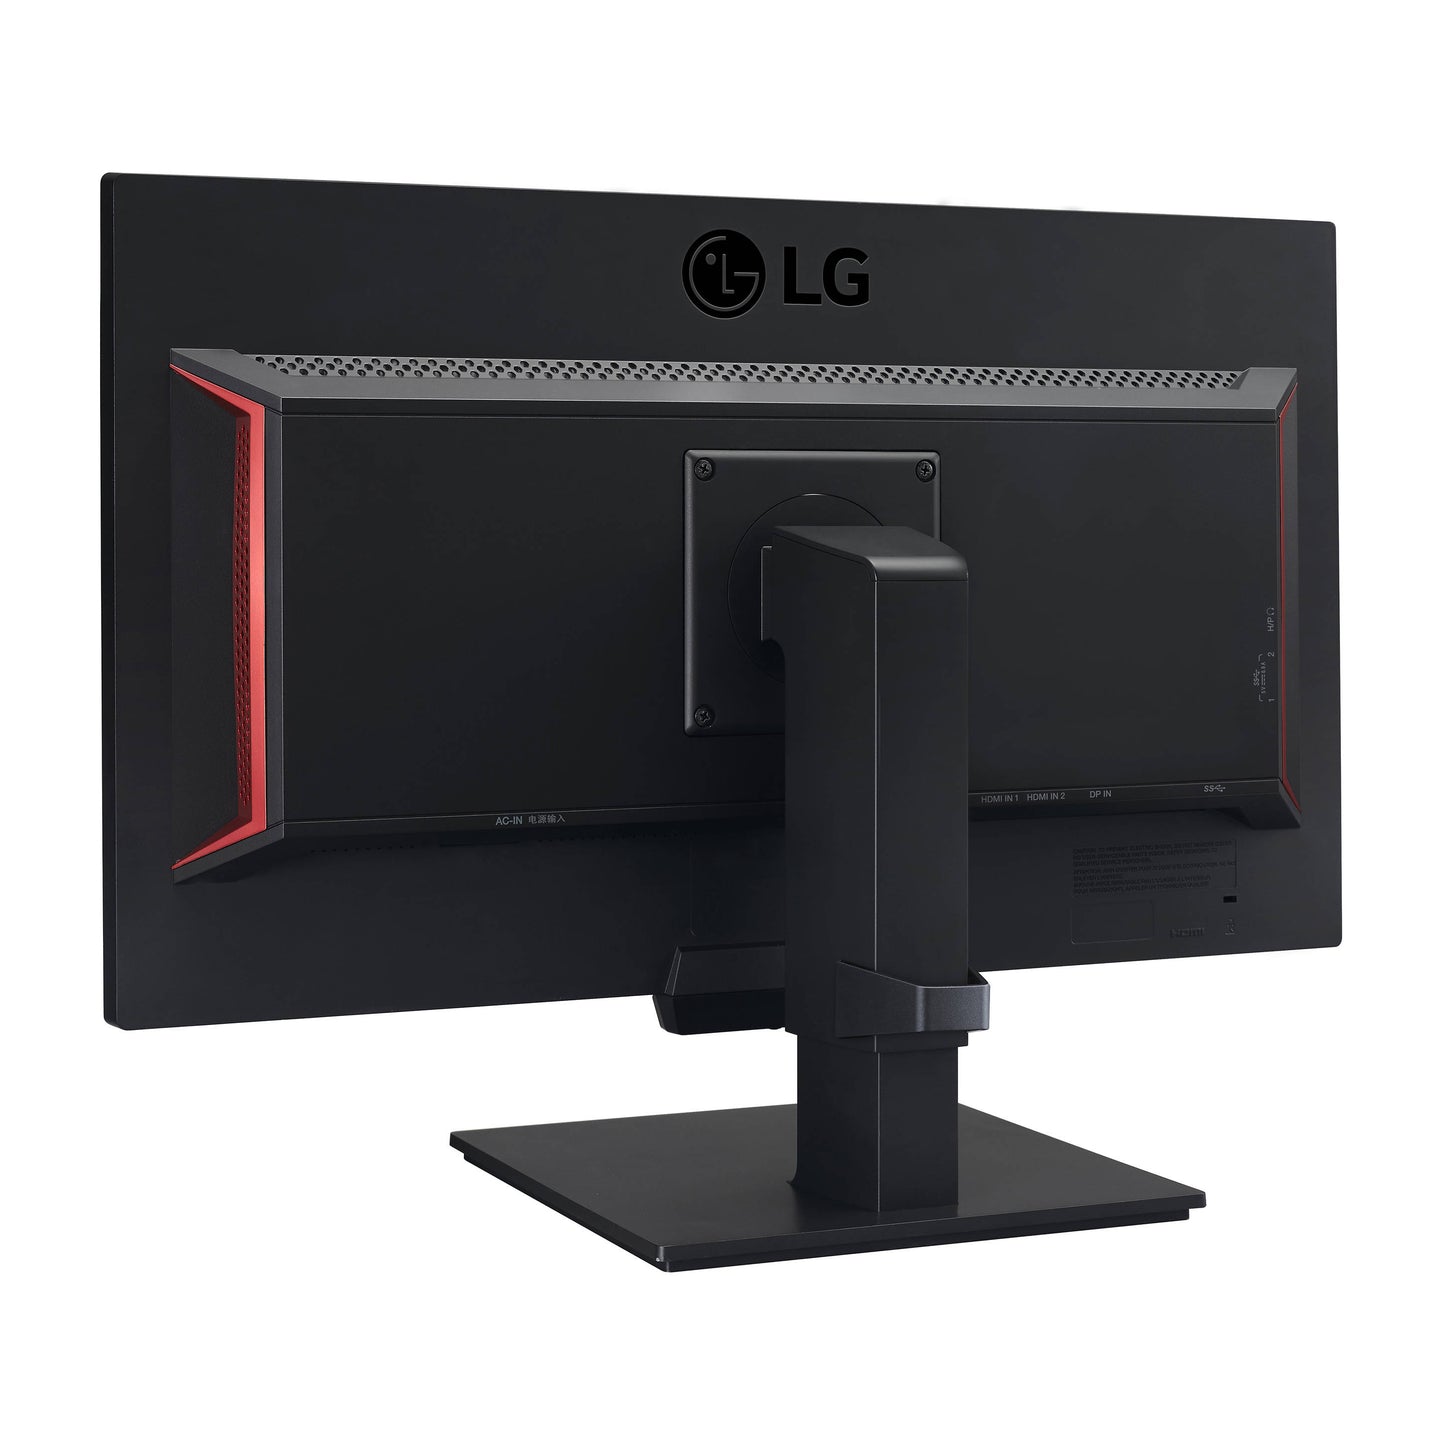 LG 24GM79G-B 24" Fhd 144hz 1ms Mbr Gaming Monitor (Used Very Clean)